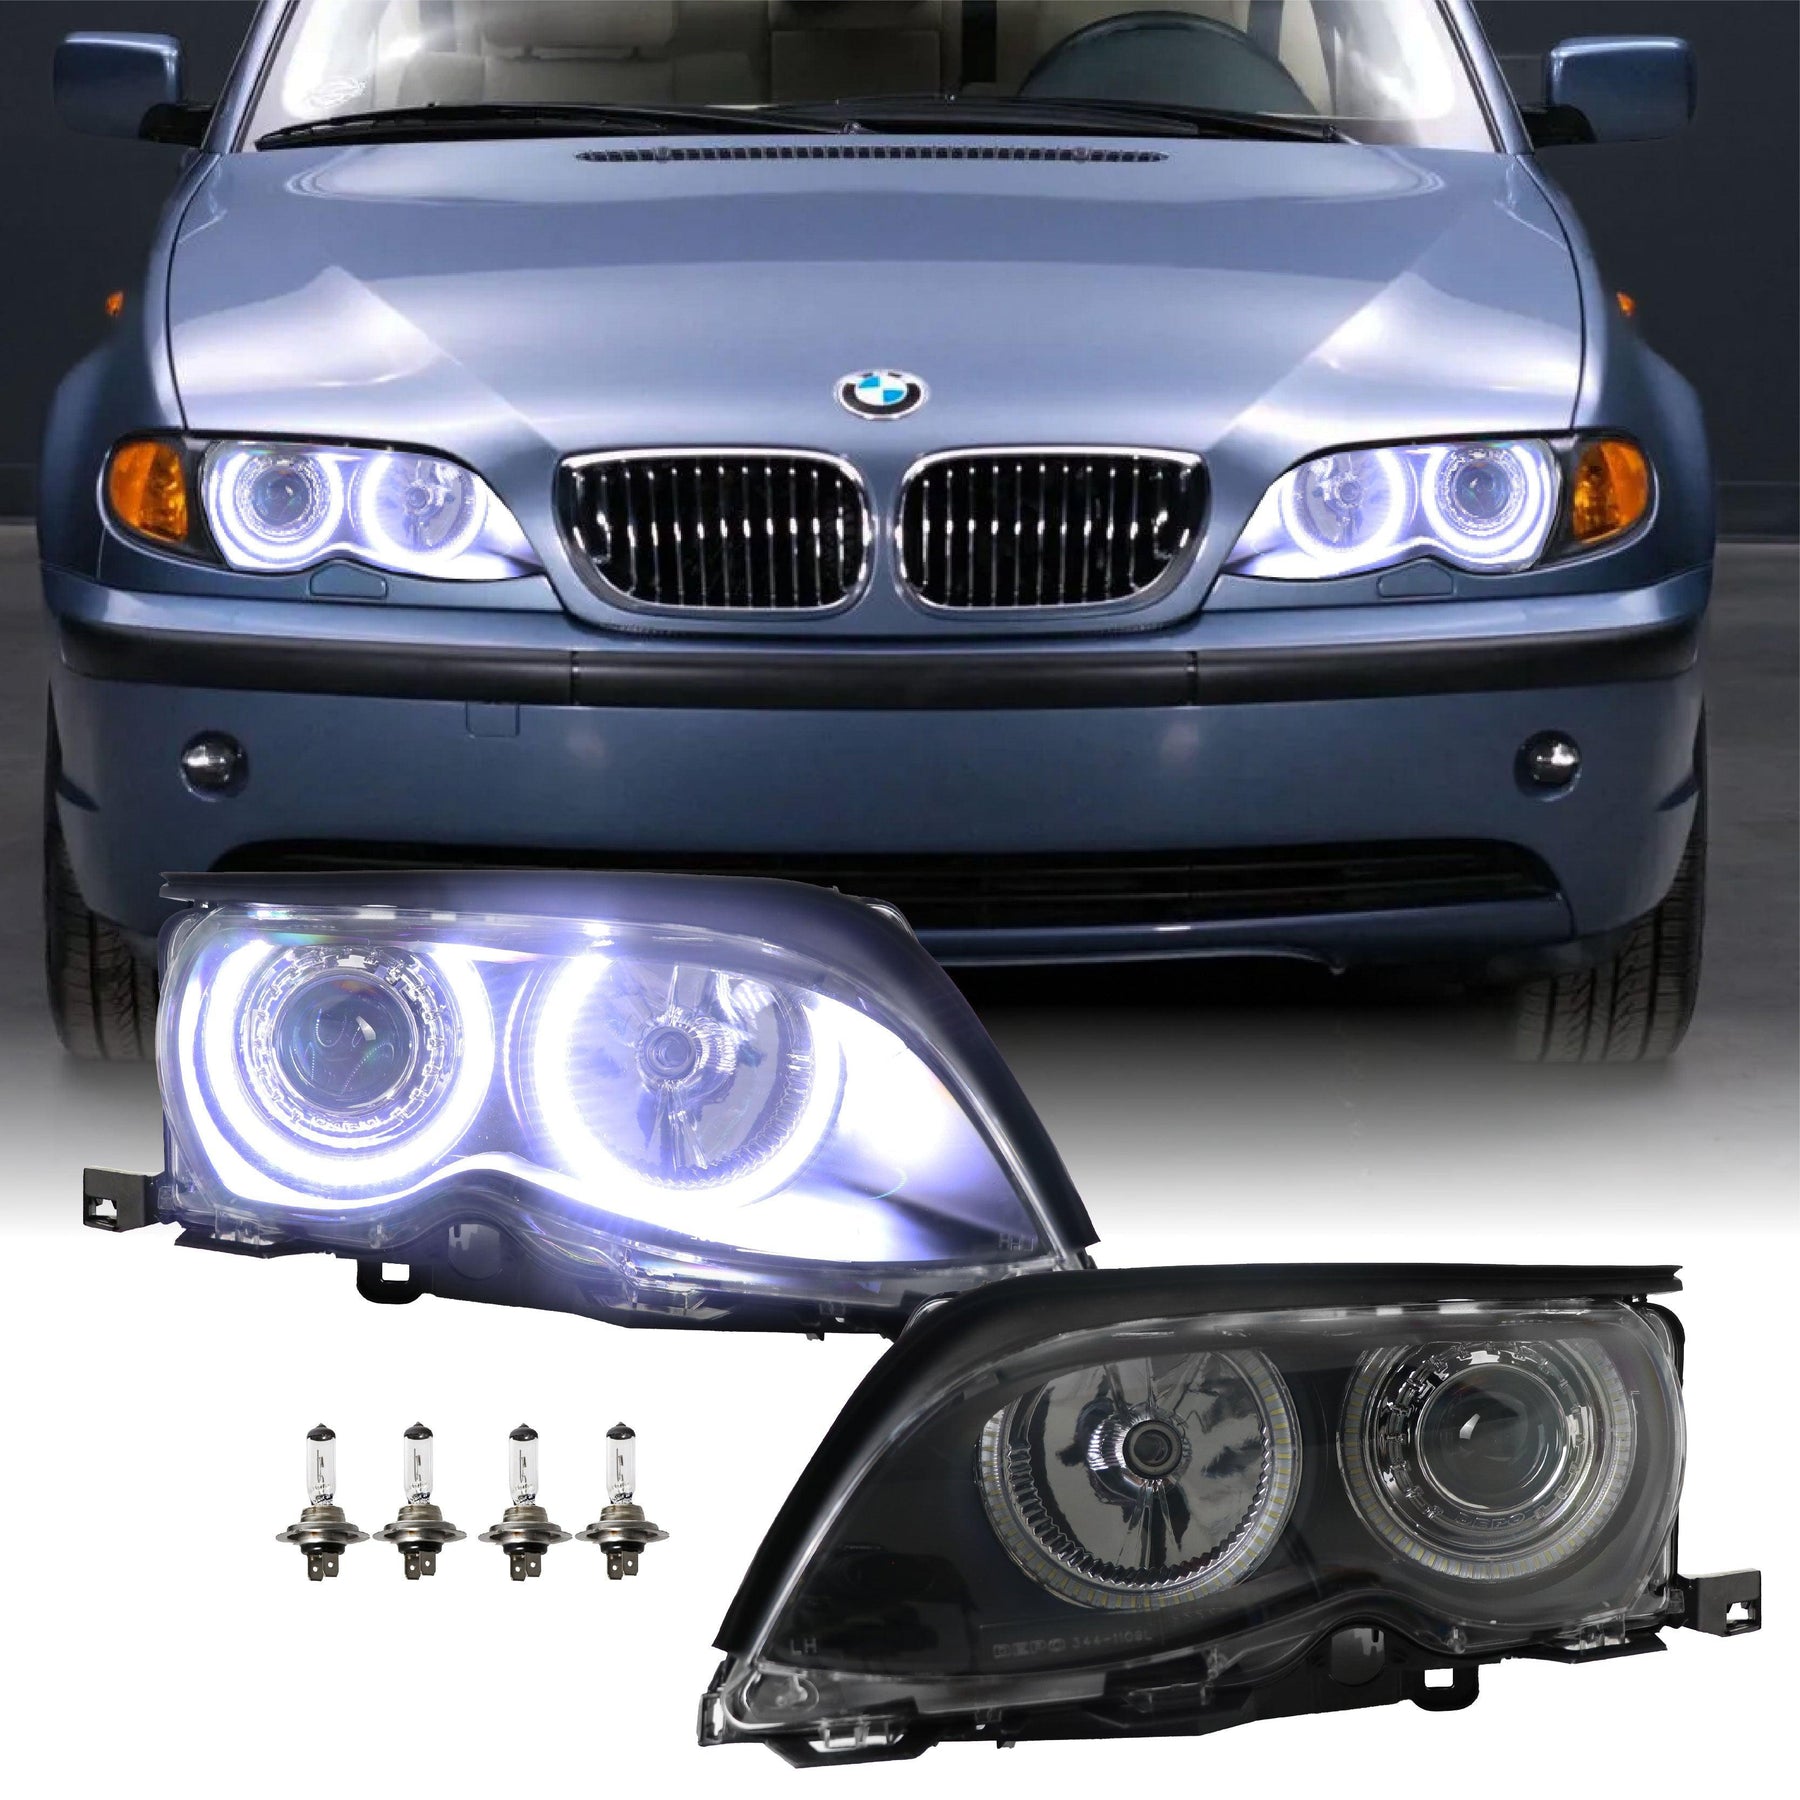 UHP LED Angel Eyes Projector Headlight for 02-05 BMW E46 3 Series